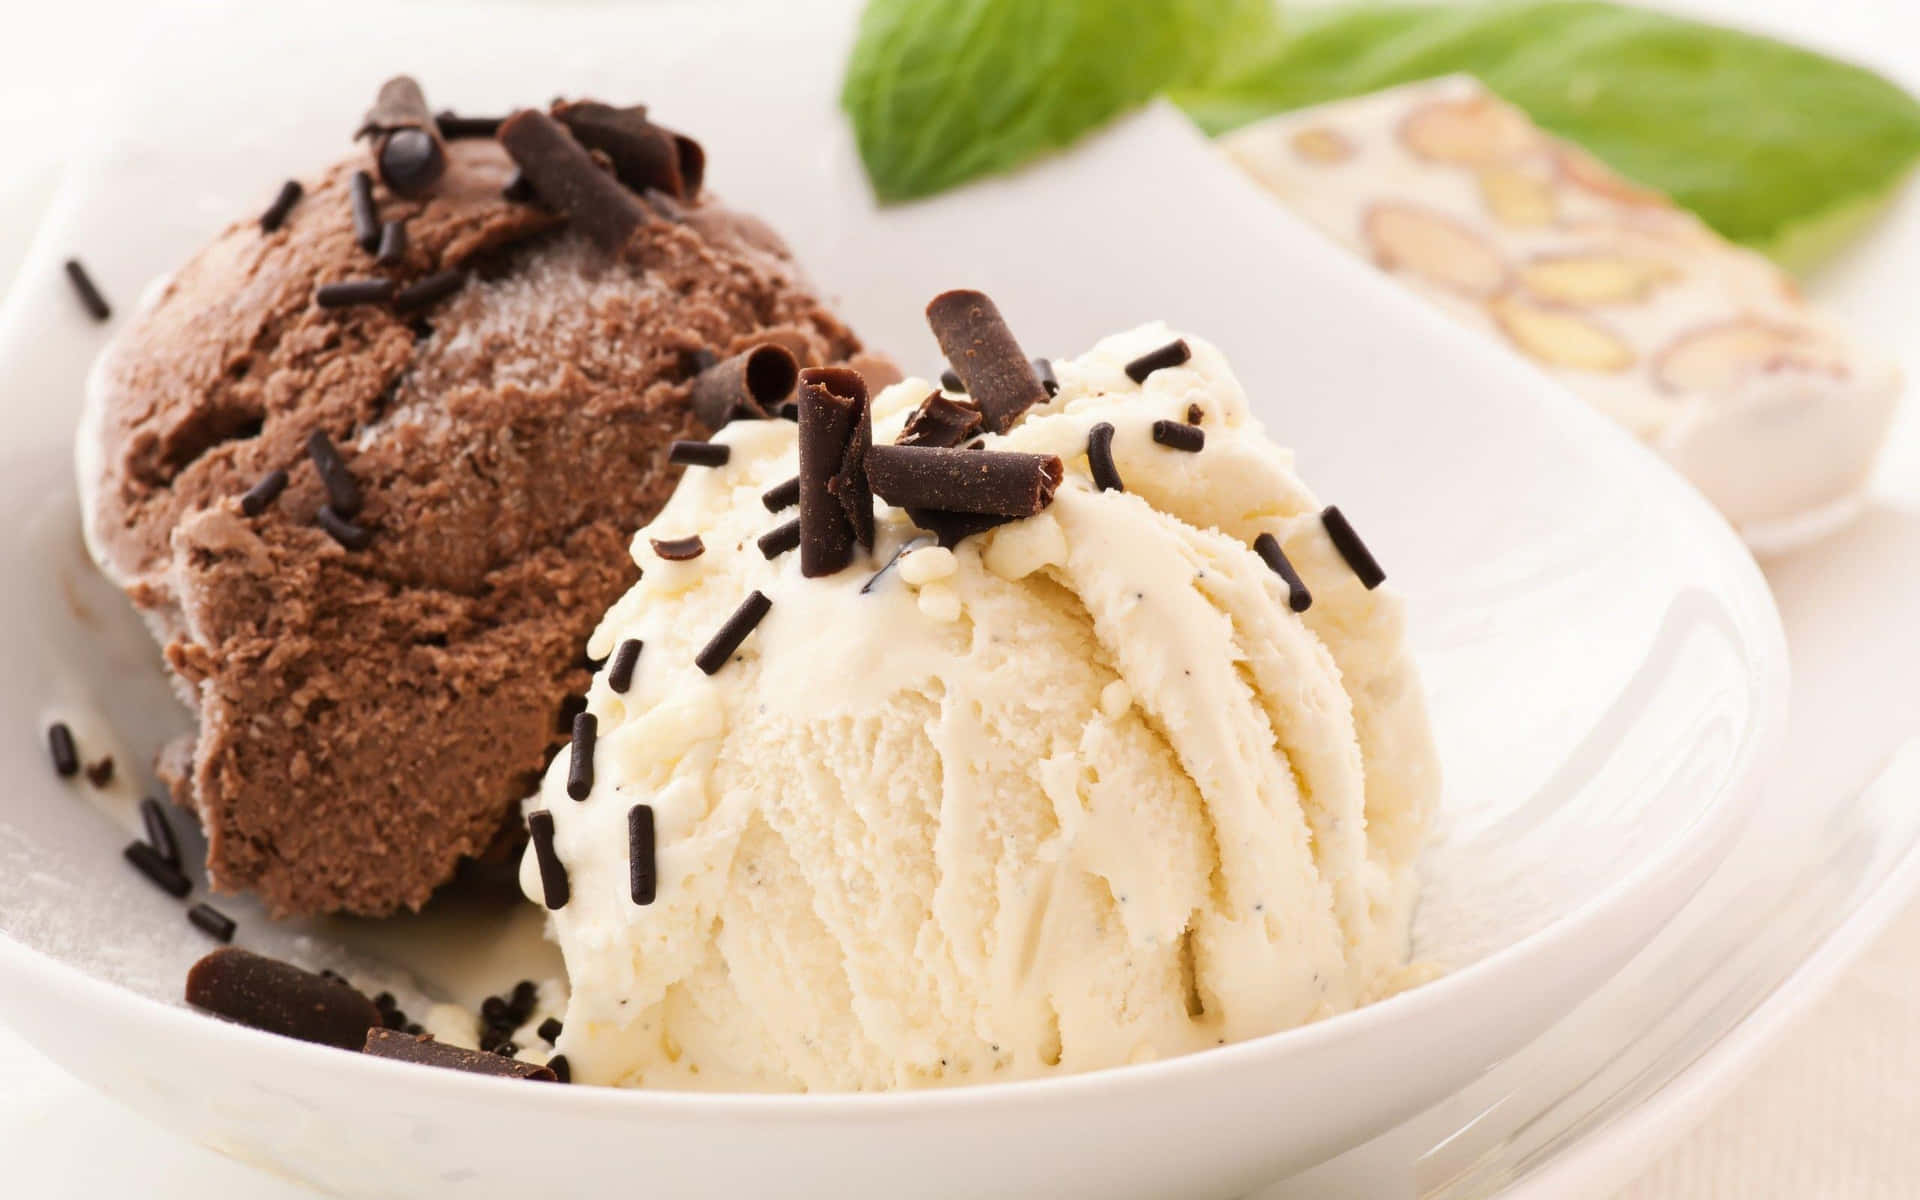 Indulge Yourself in Delicious Ice Cream!